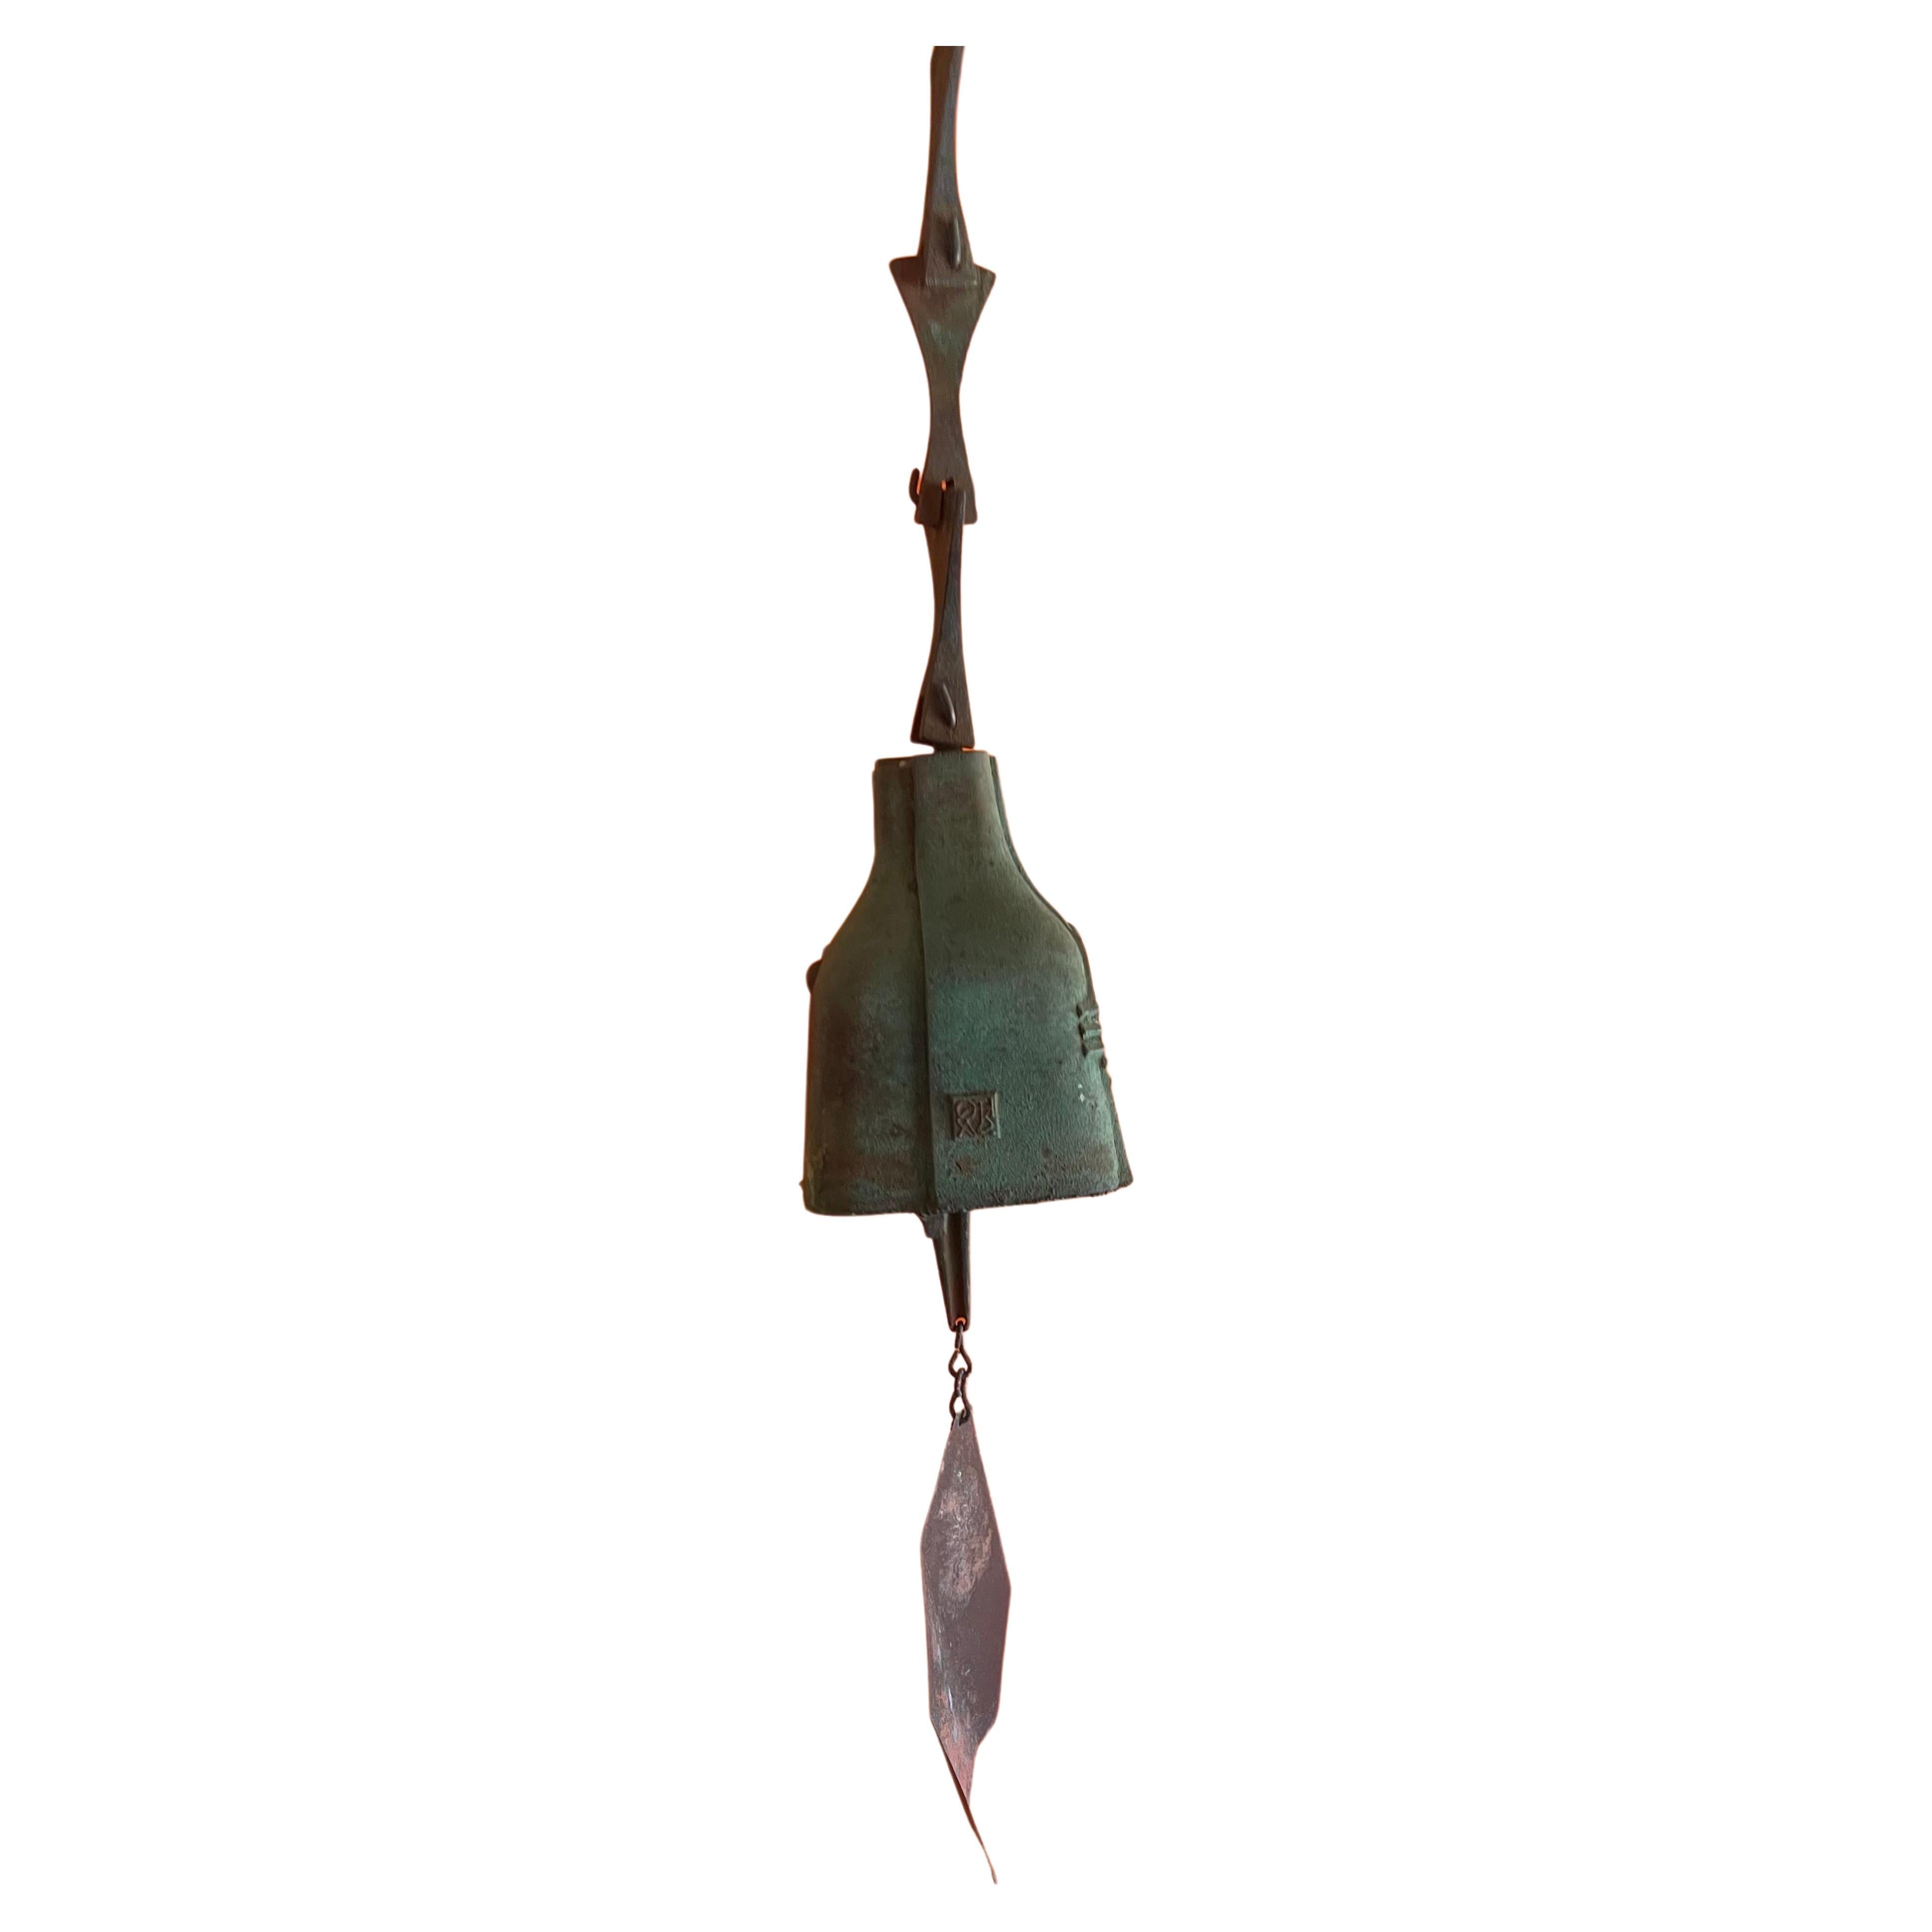 Mid-Century Modern Large Bronze Wind Chime / Bell by Paolo Soleri for Cosanti